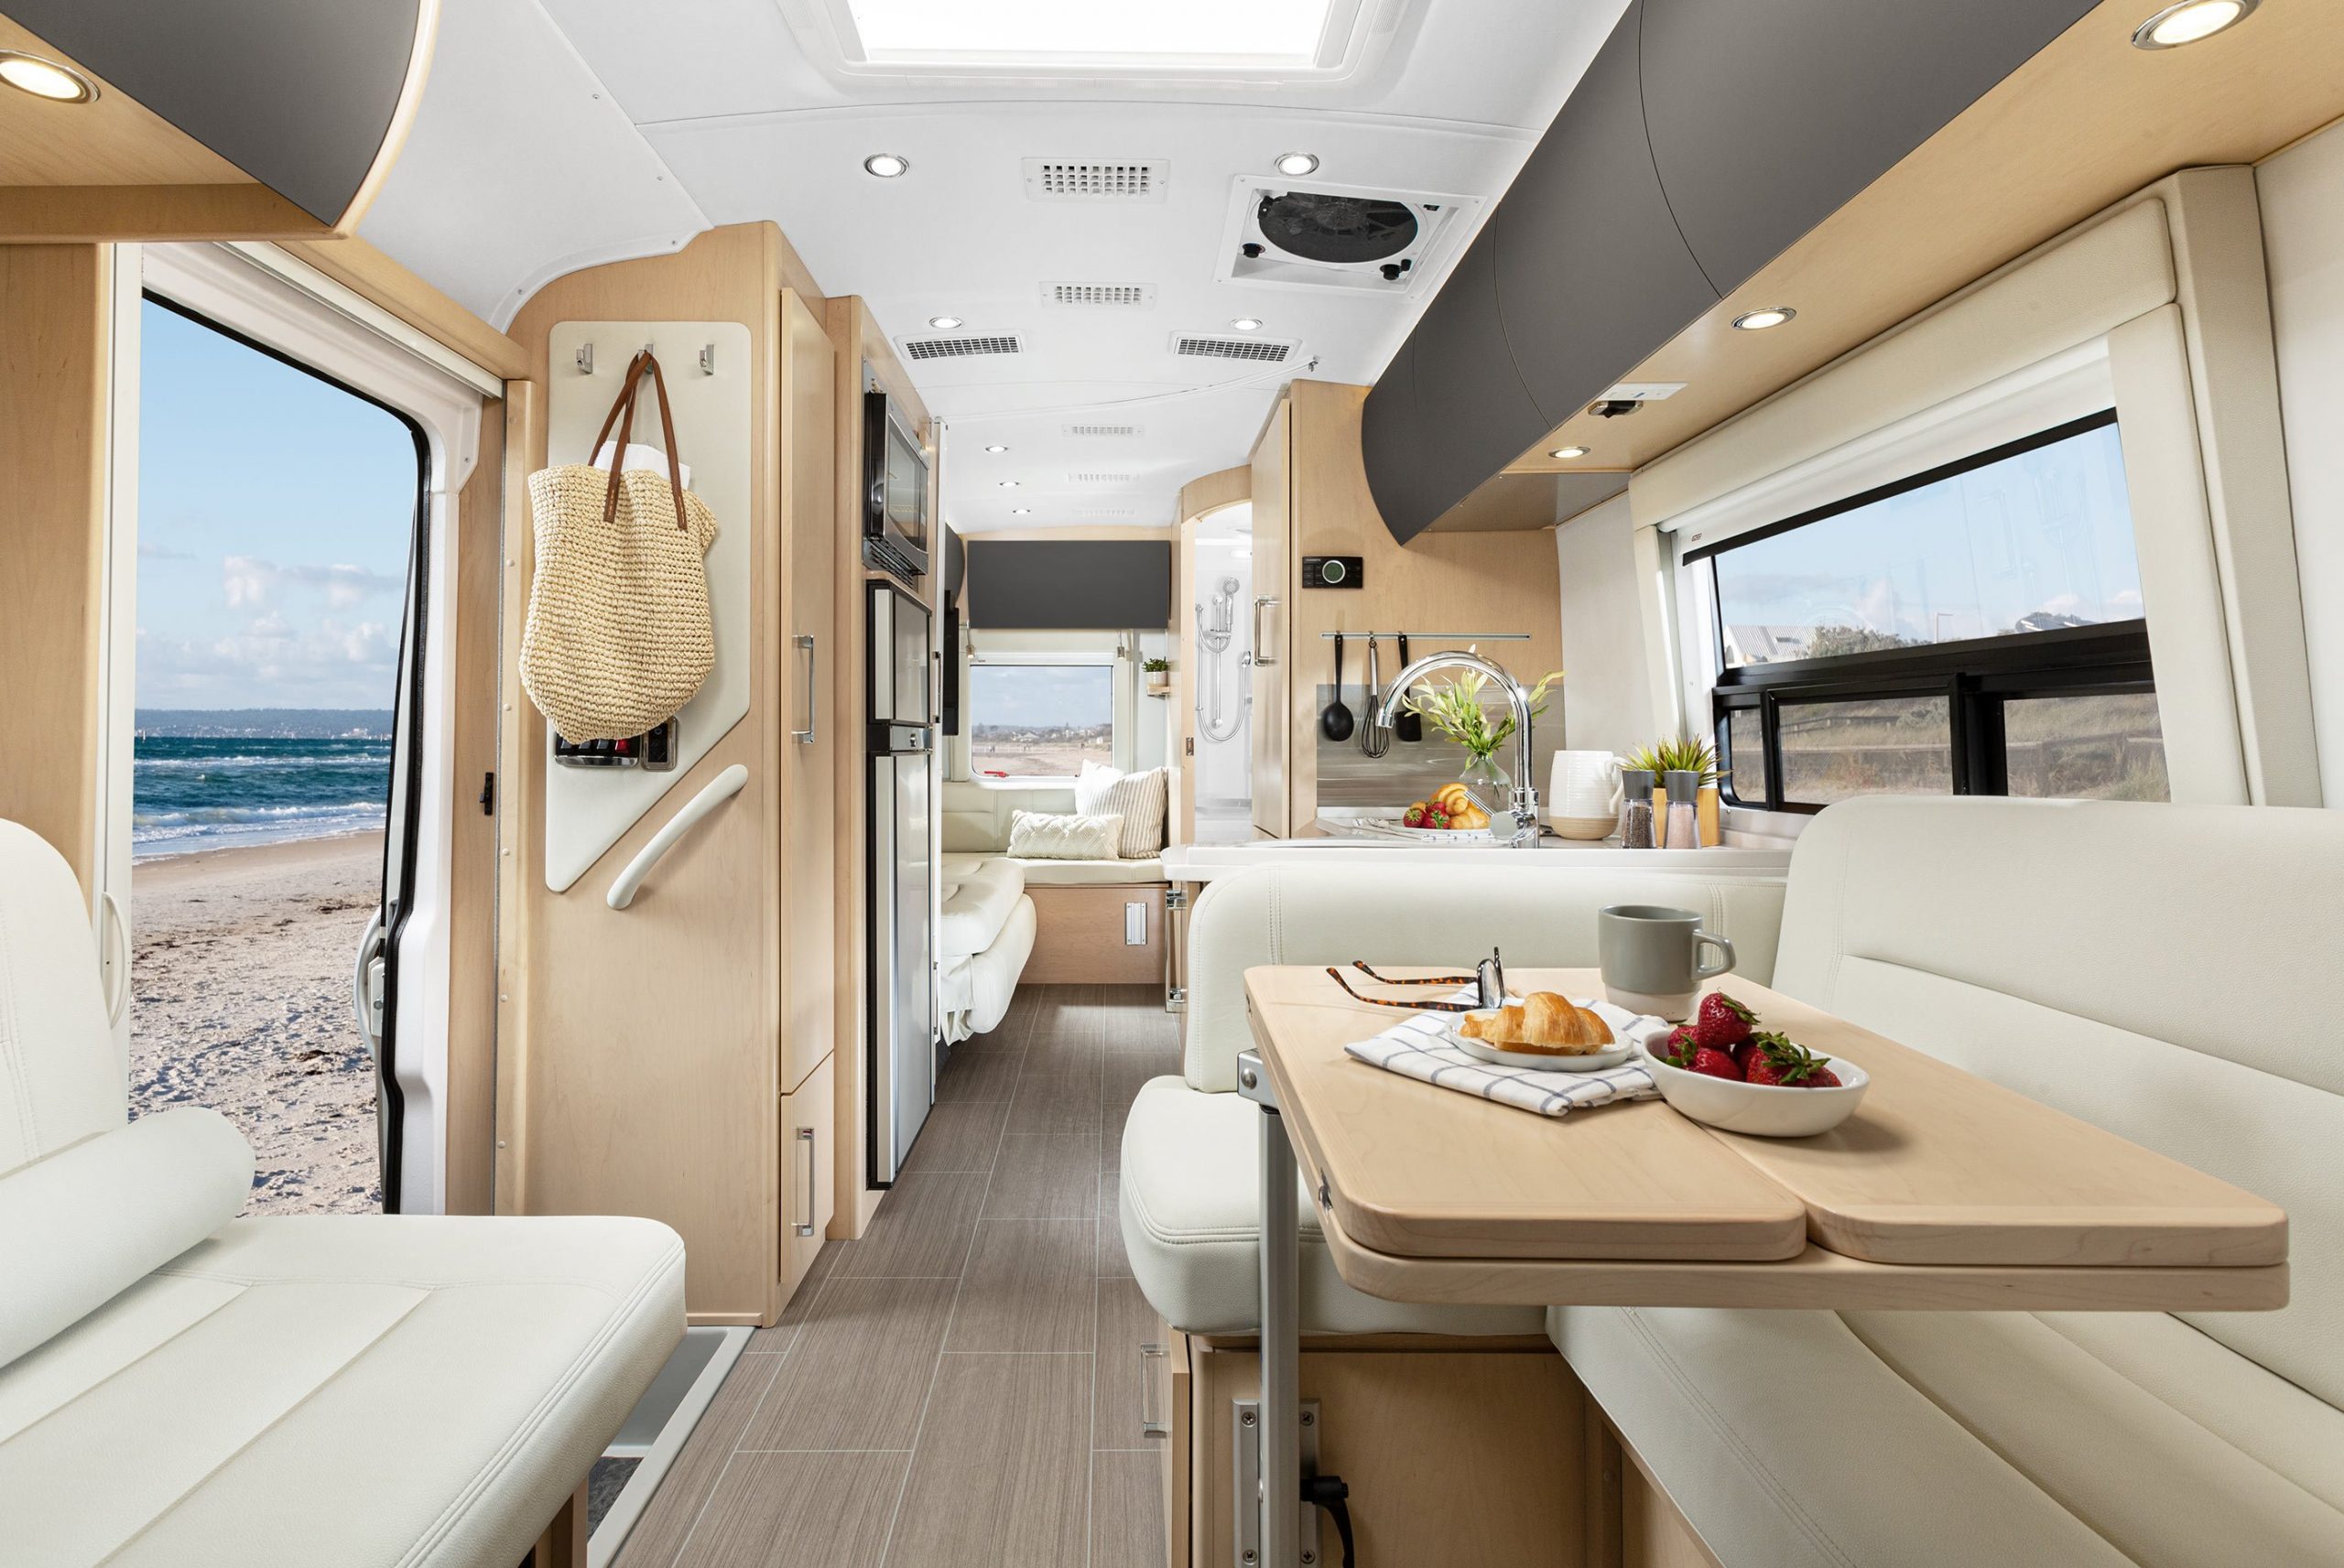 There's 1 Camper Van That Gives You the Most for Your Money